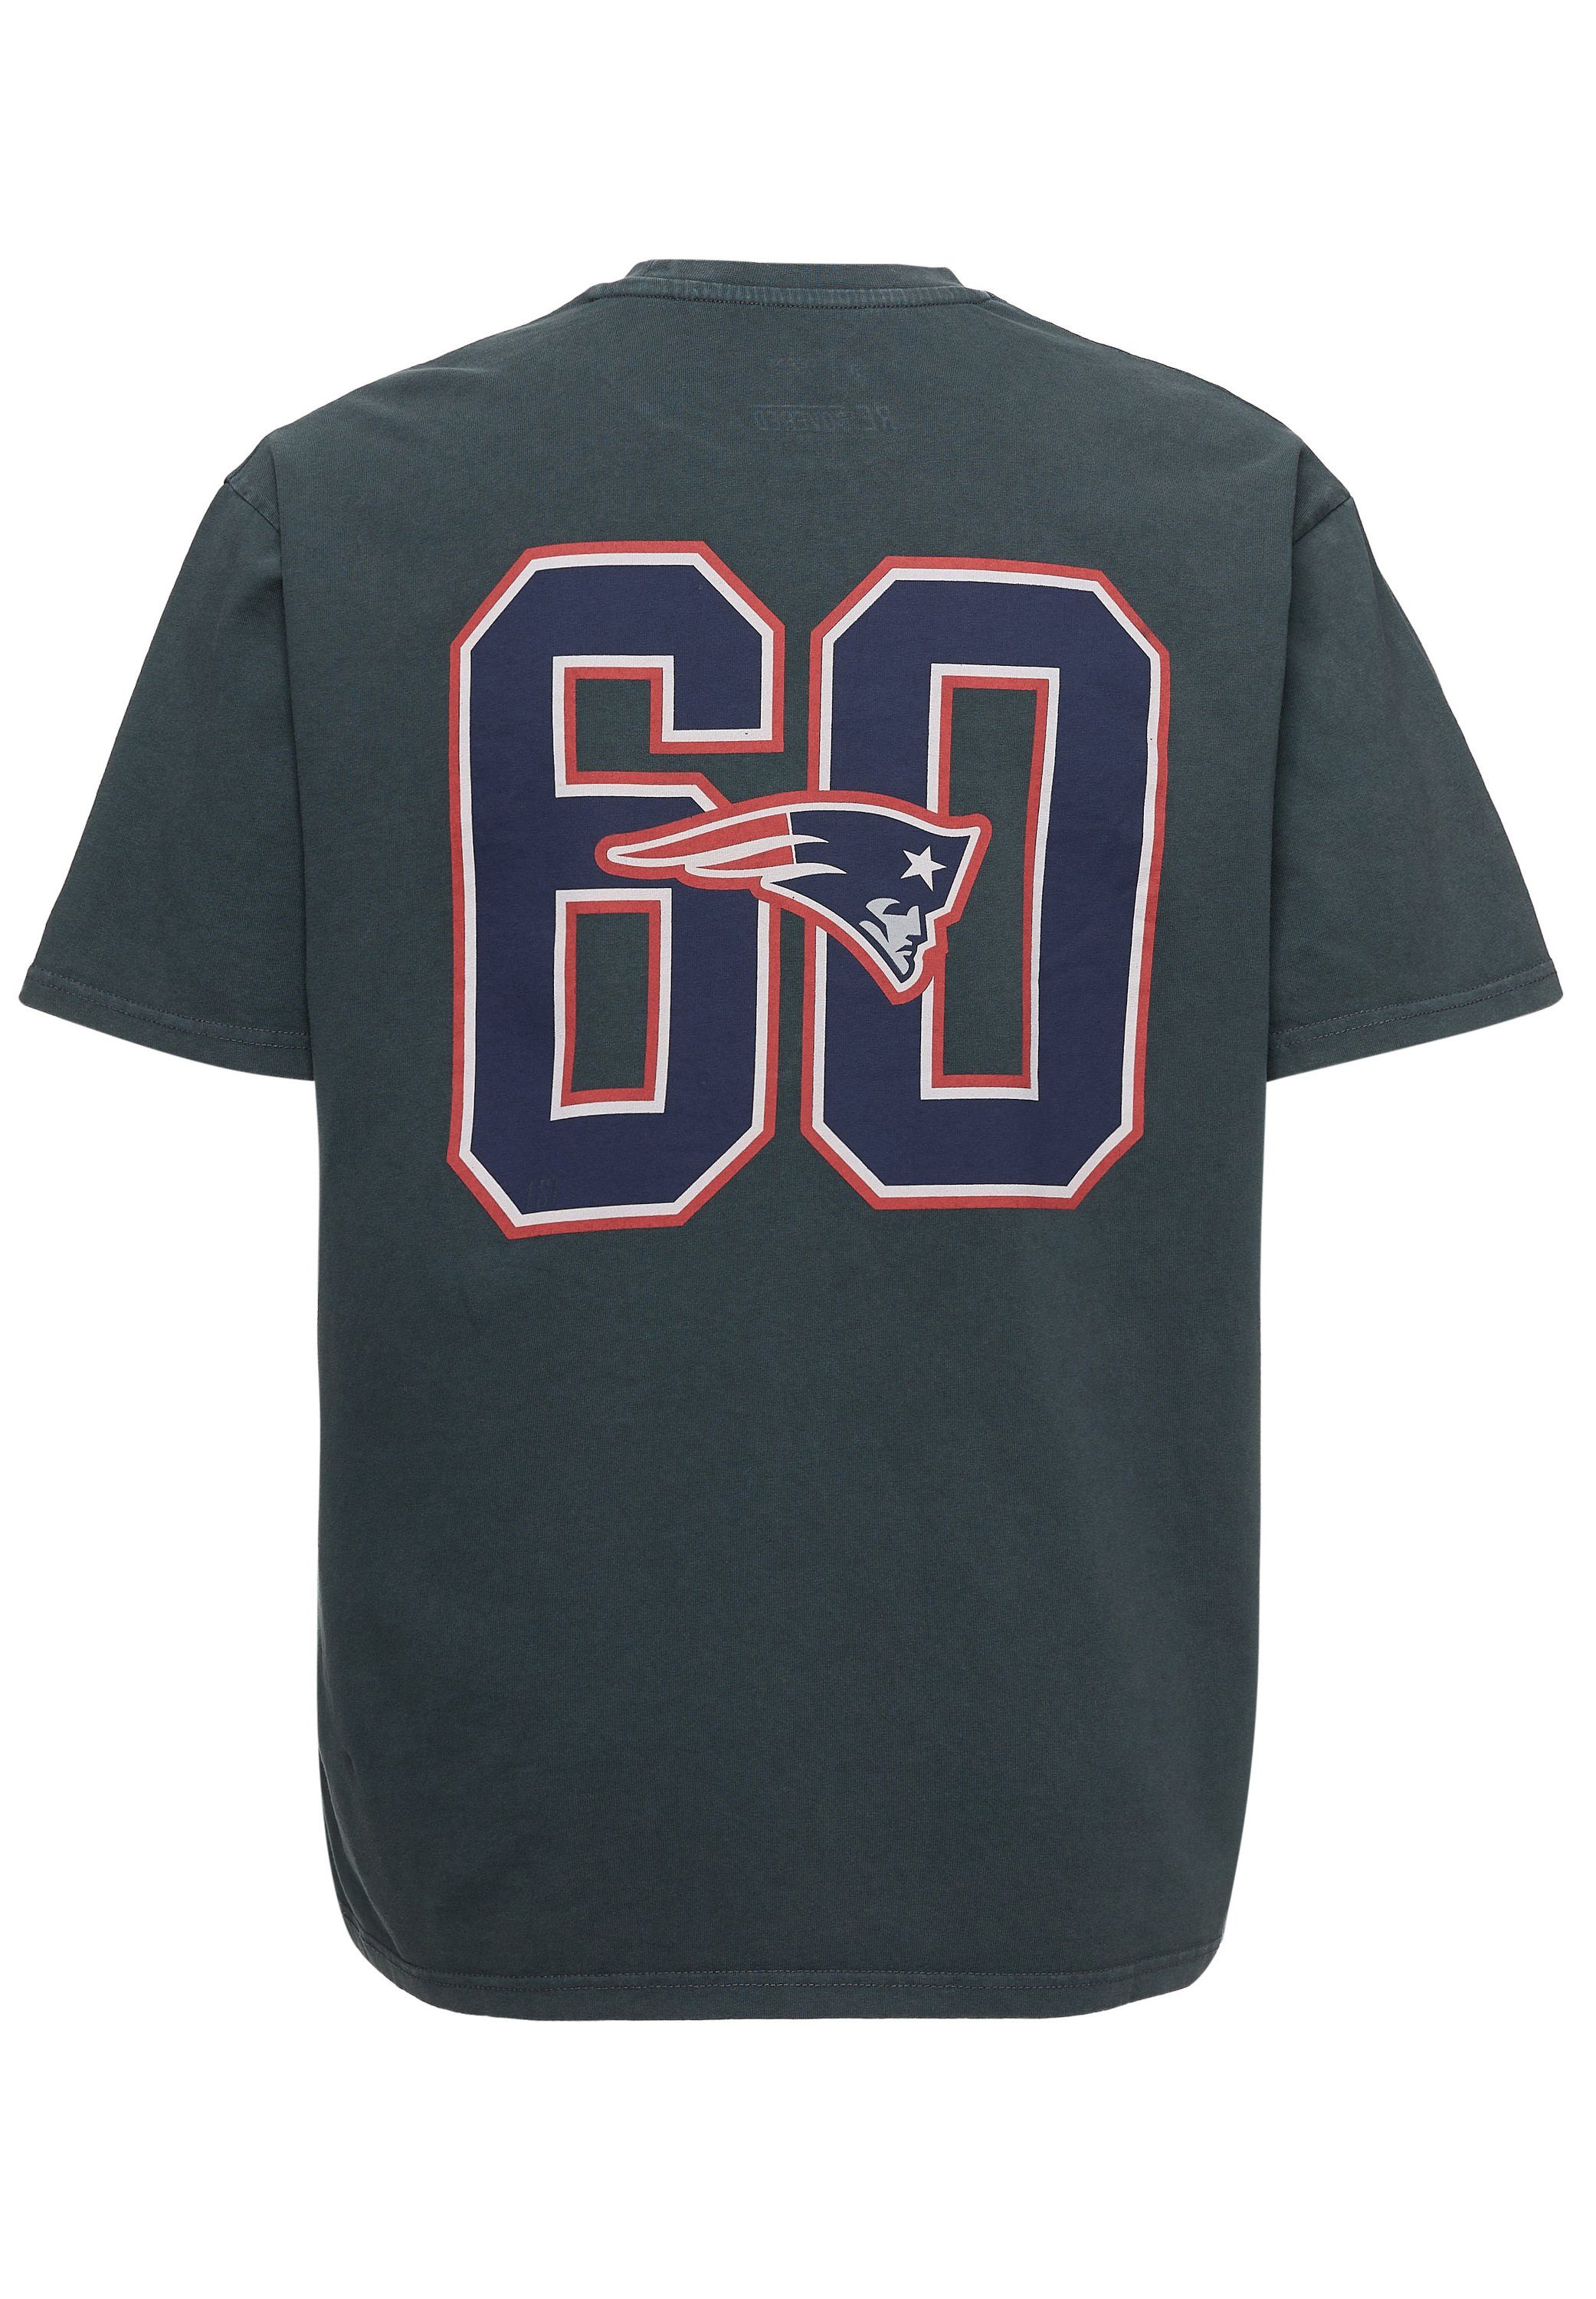 Recovered Relaxed Bio-Baumwolle Washed GOTS zertifizierte 17 NFL Patriots T-Shirt